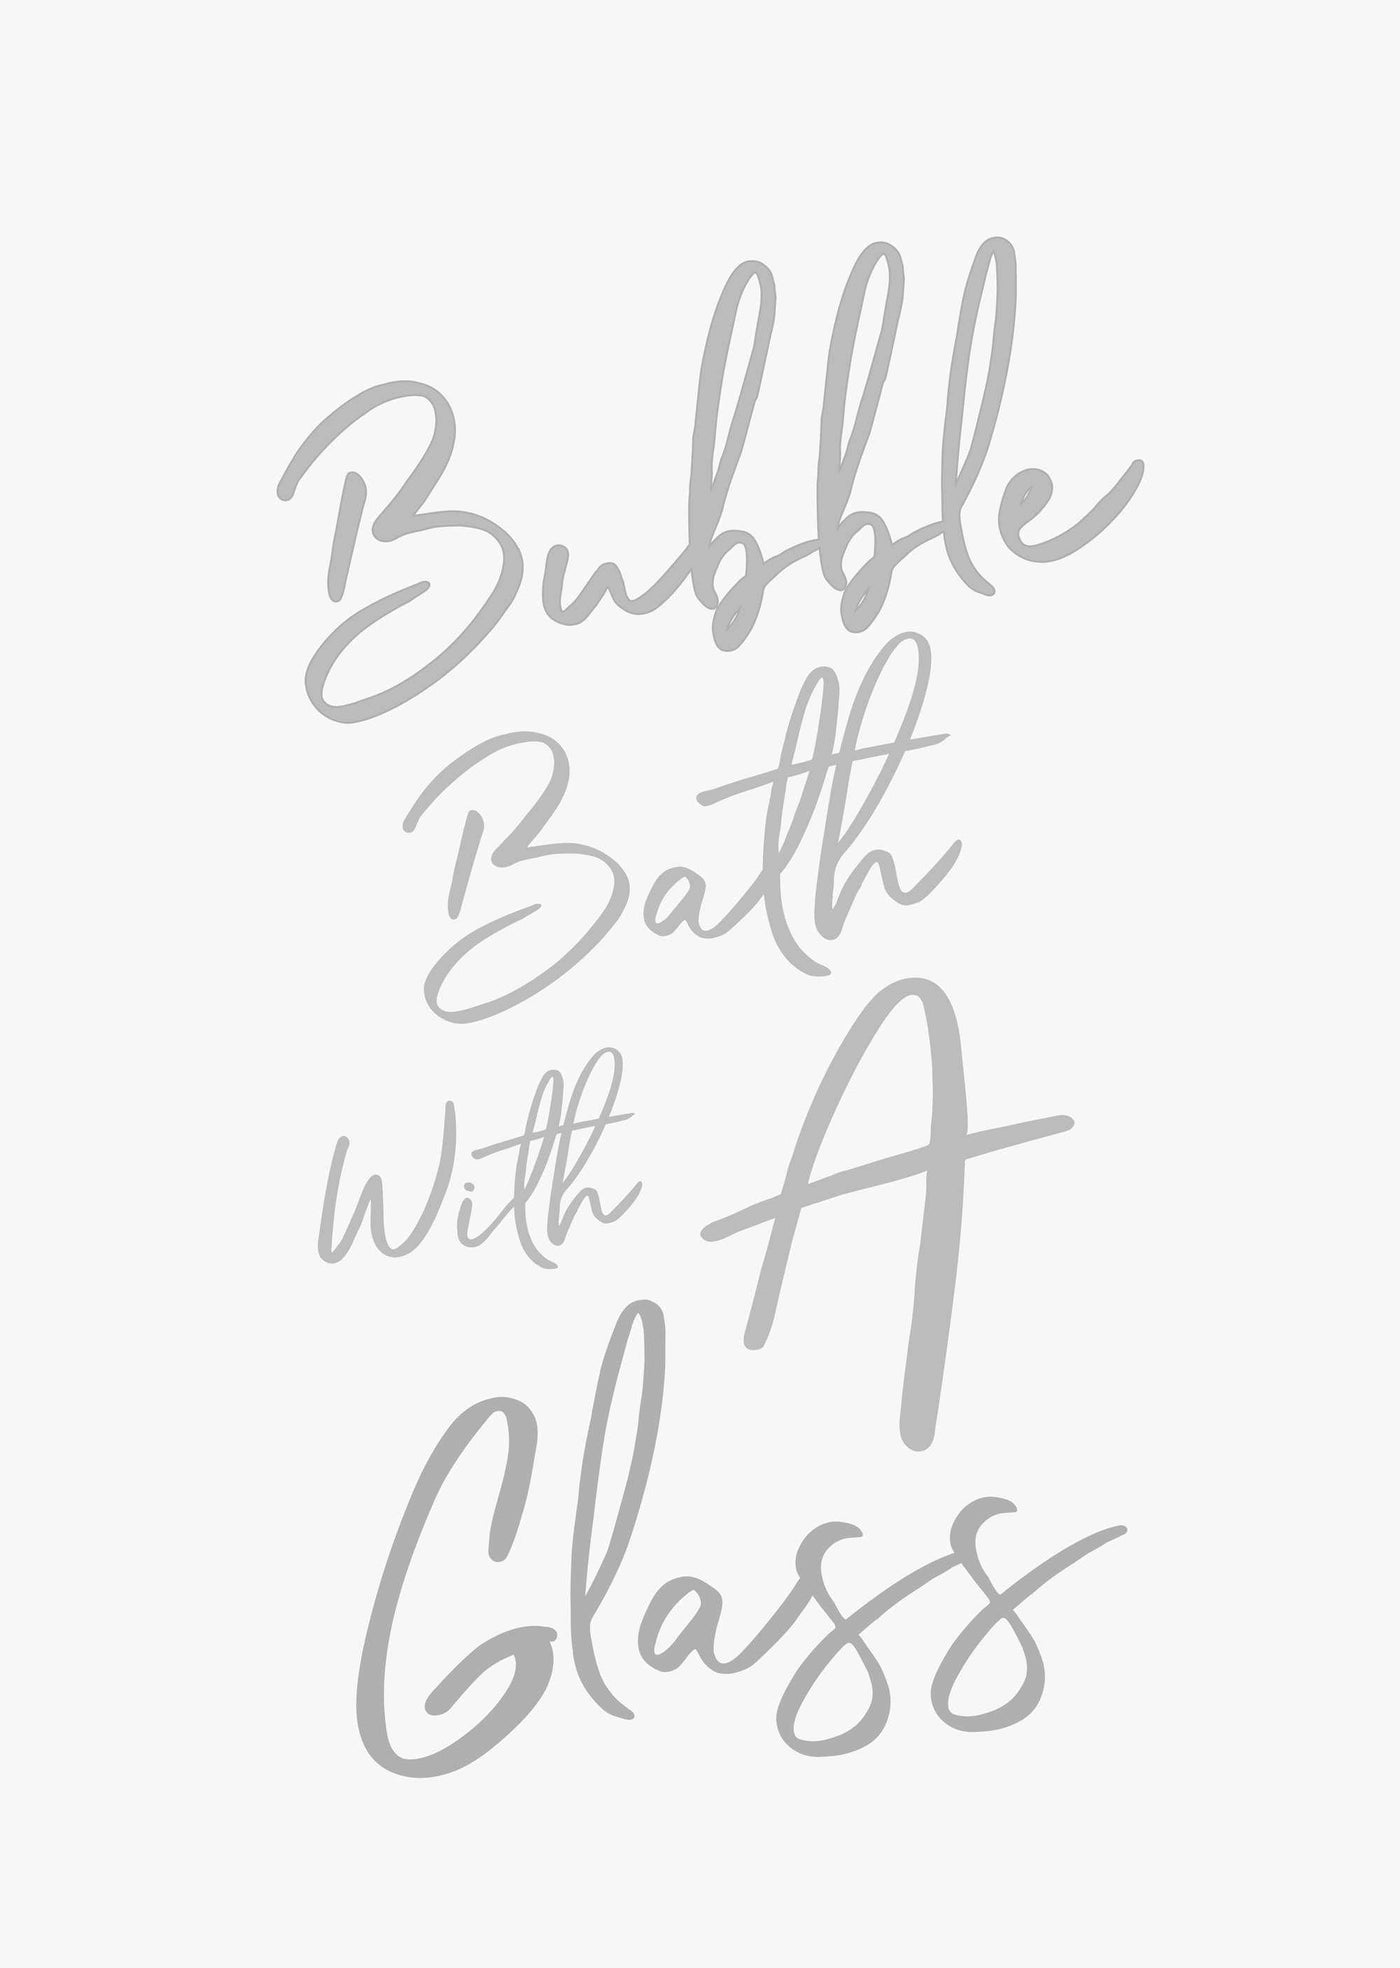 Typographic Wall Art Print 'Bubble Bath With A Glass' (Grey Edition)